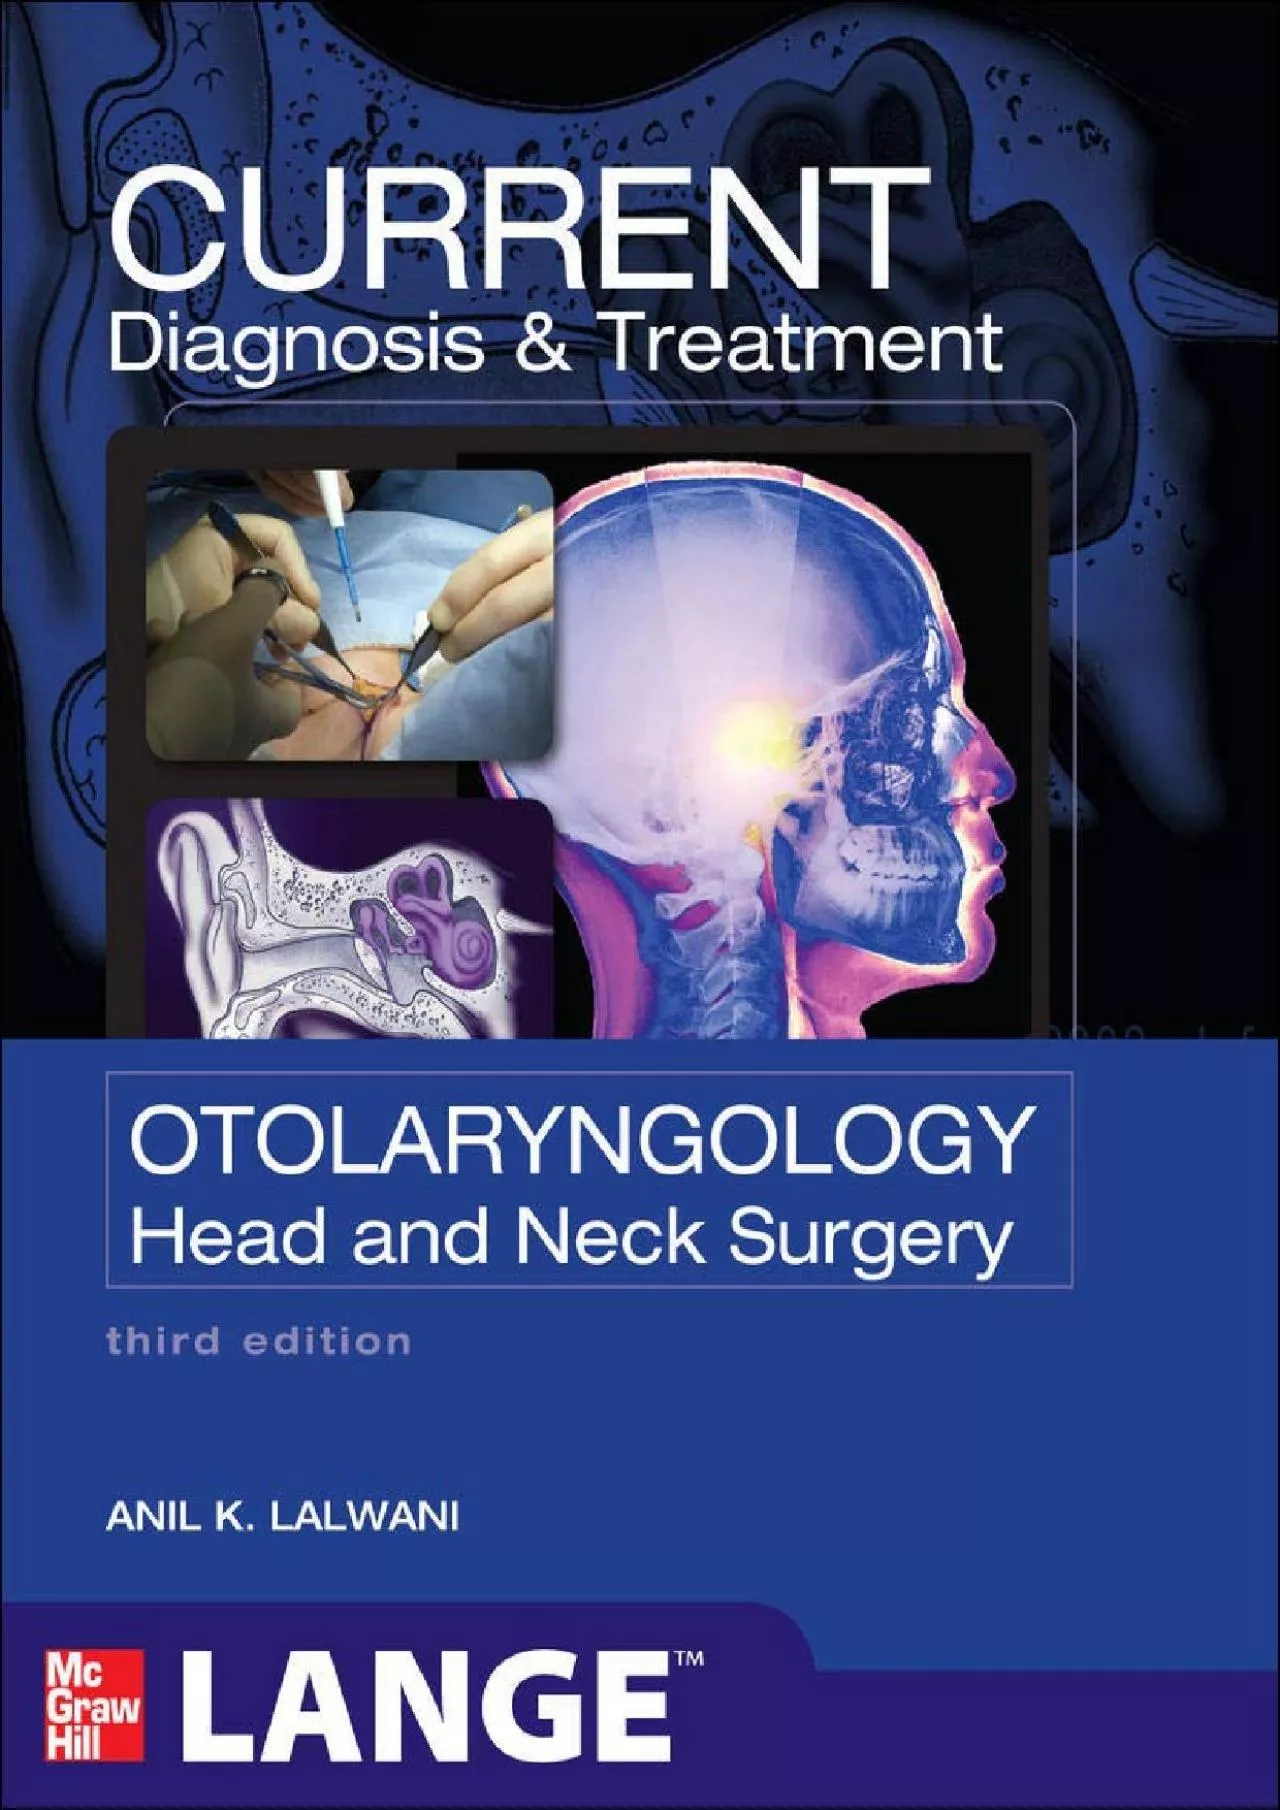 (DOWNLOAD)-CURRENT Diagnosis & Treatment Otolaryngology--Head and Neck Surgery, Third